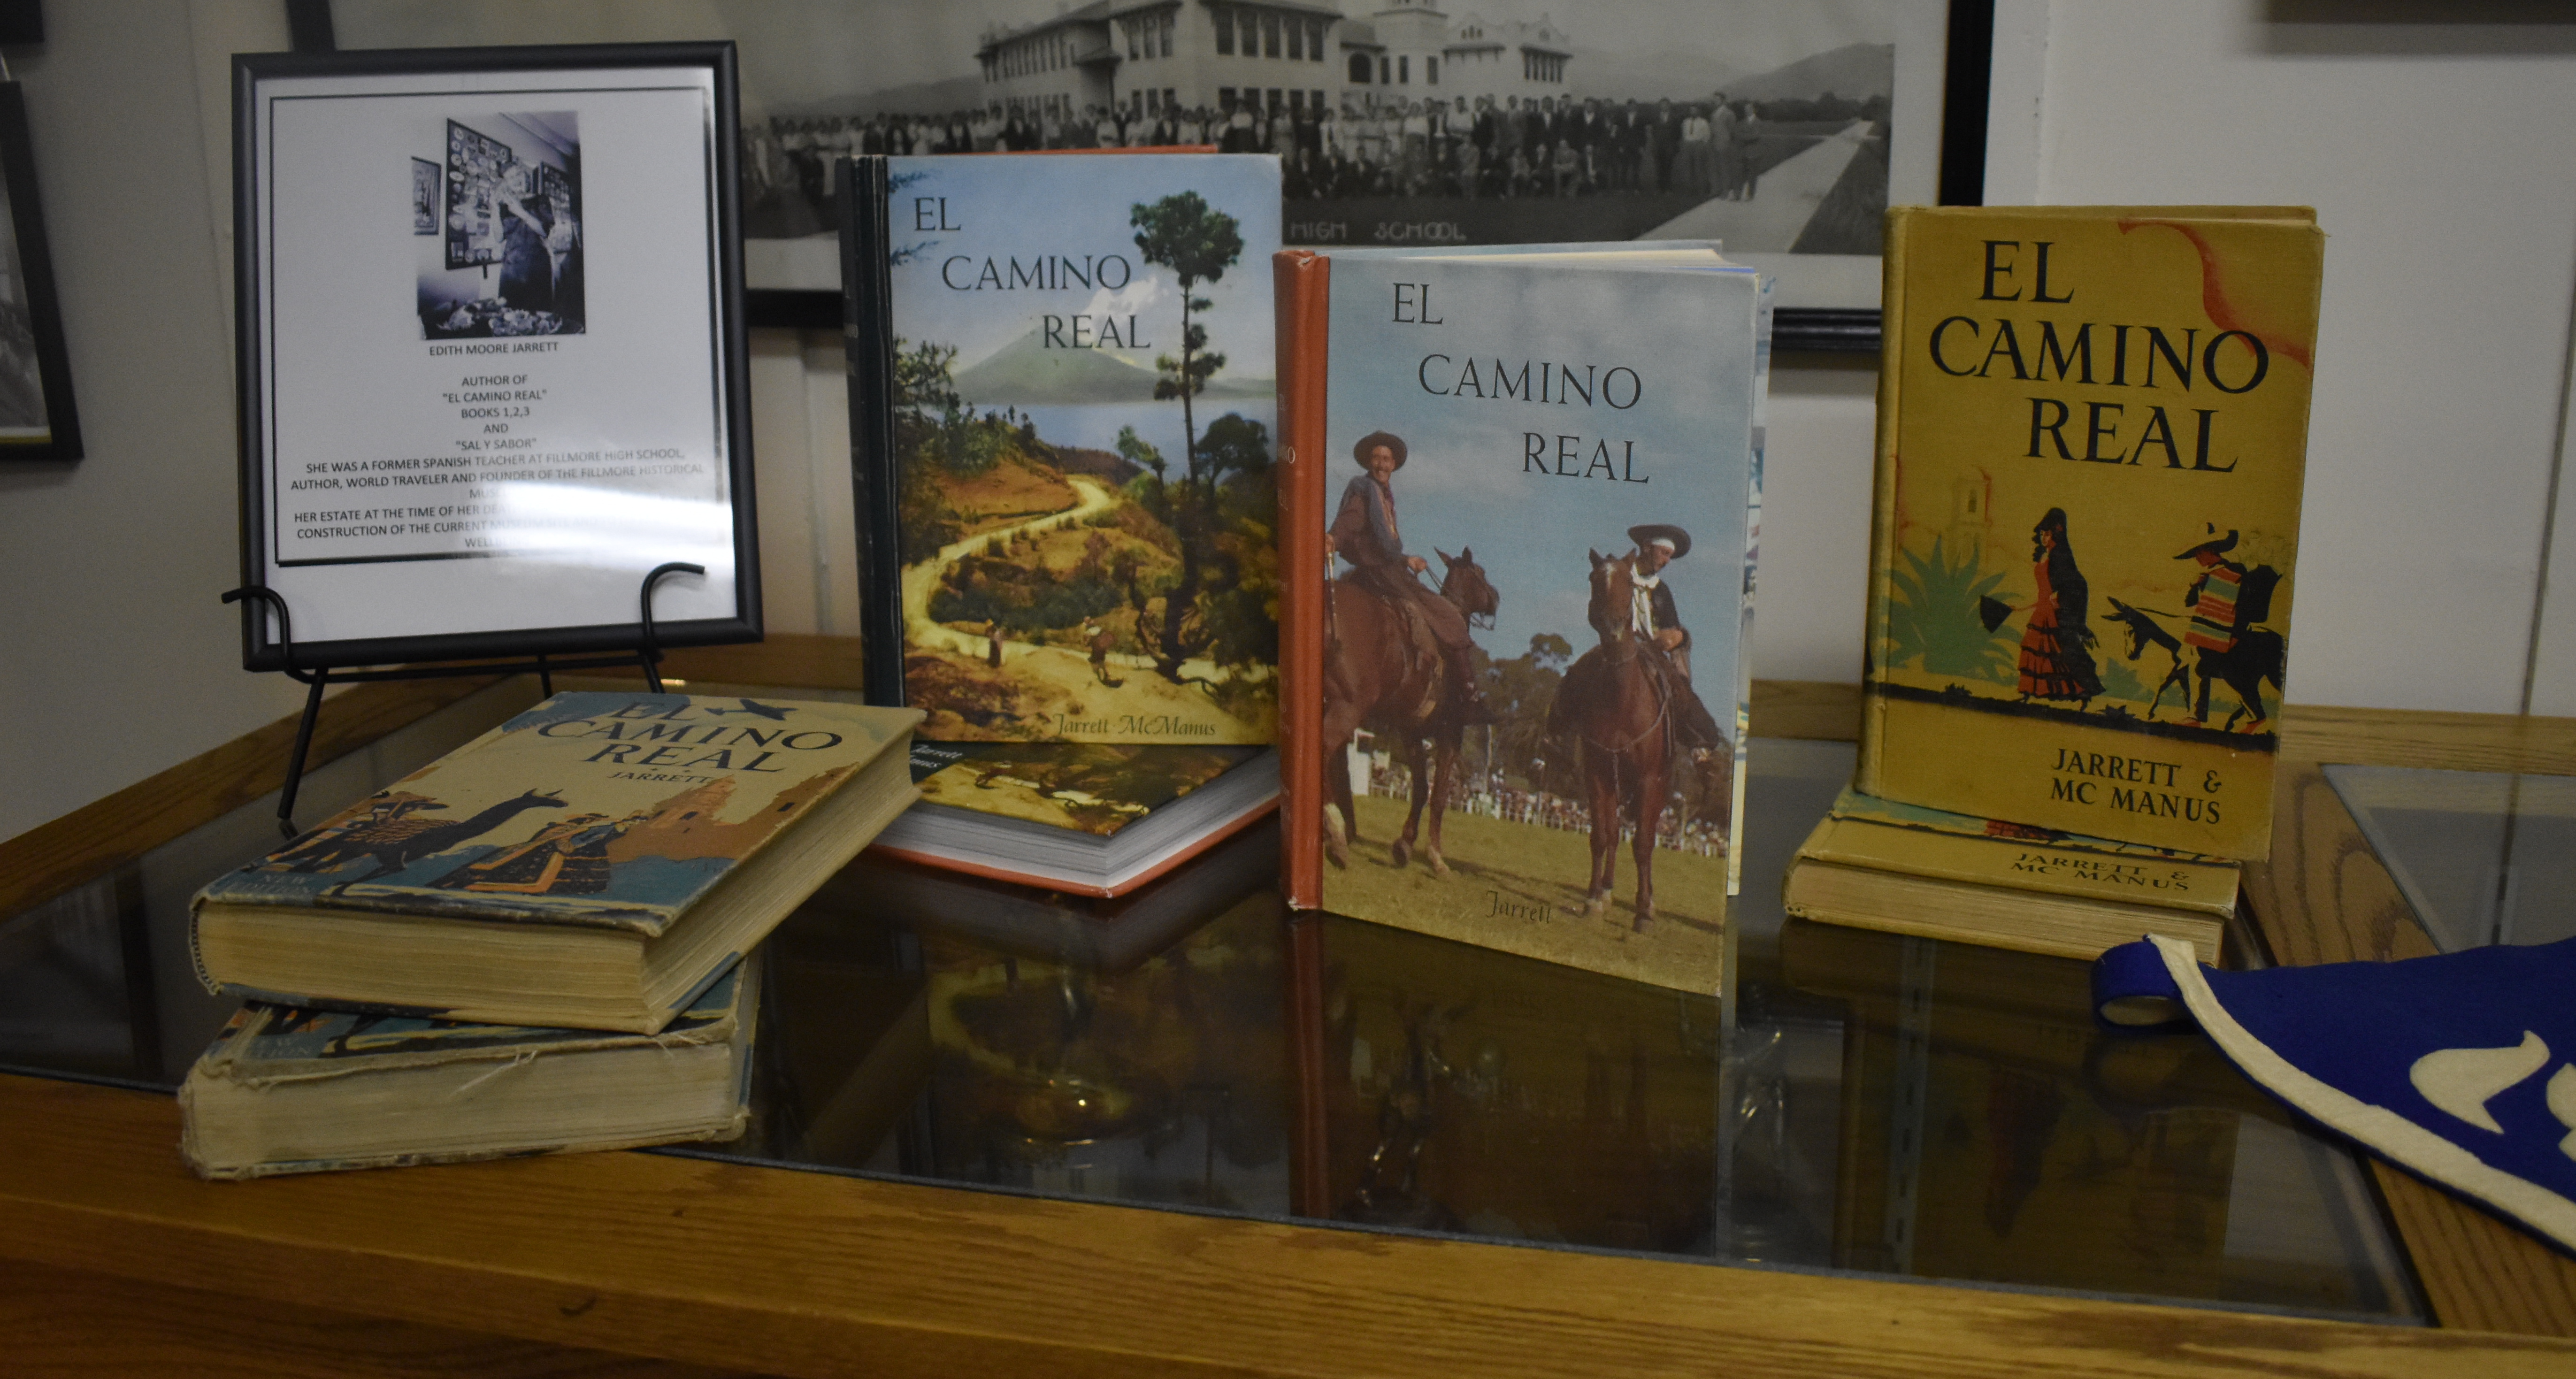 El Camino Real - the book behind the Museum